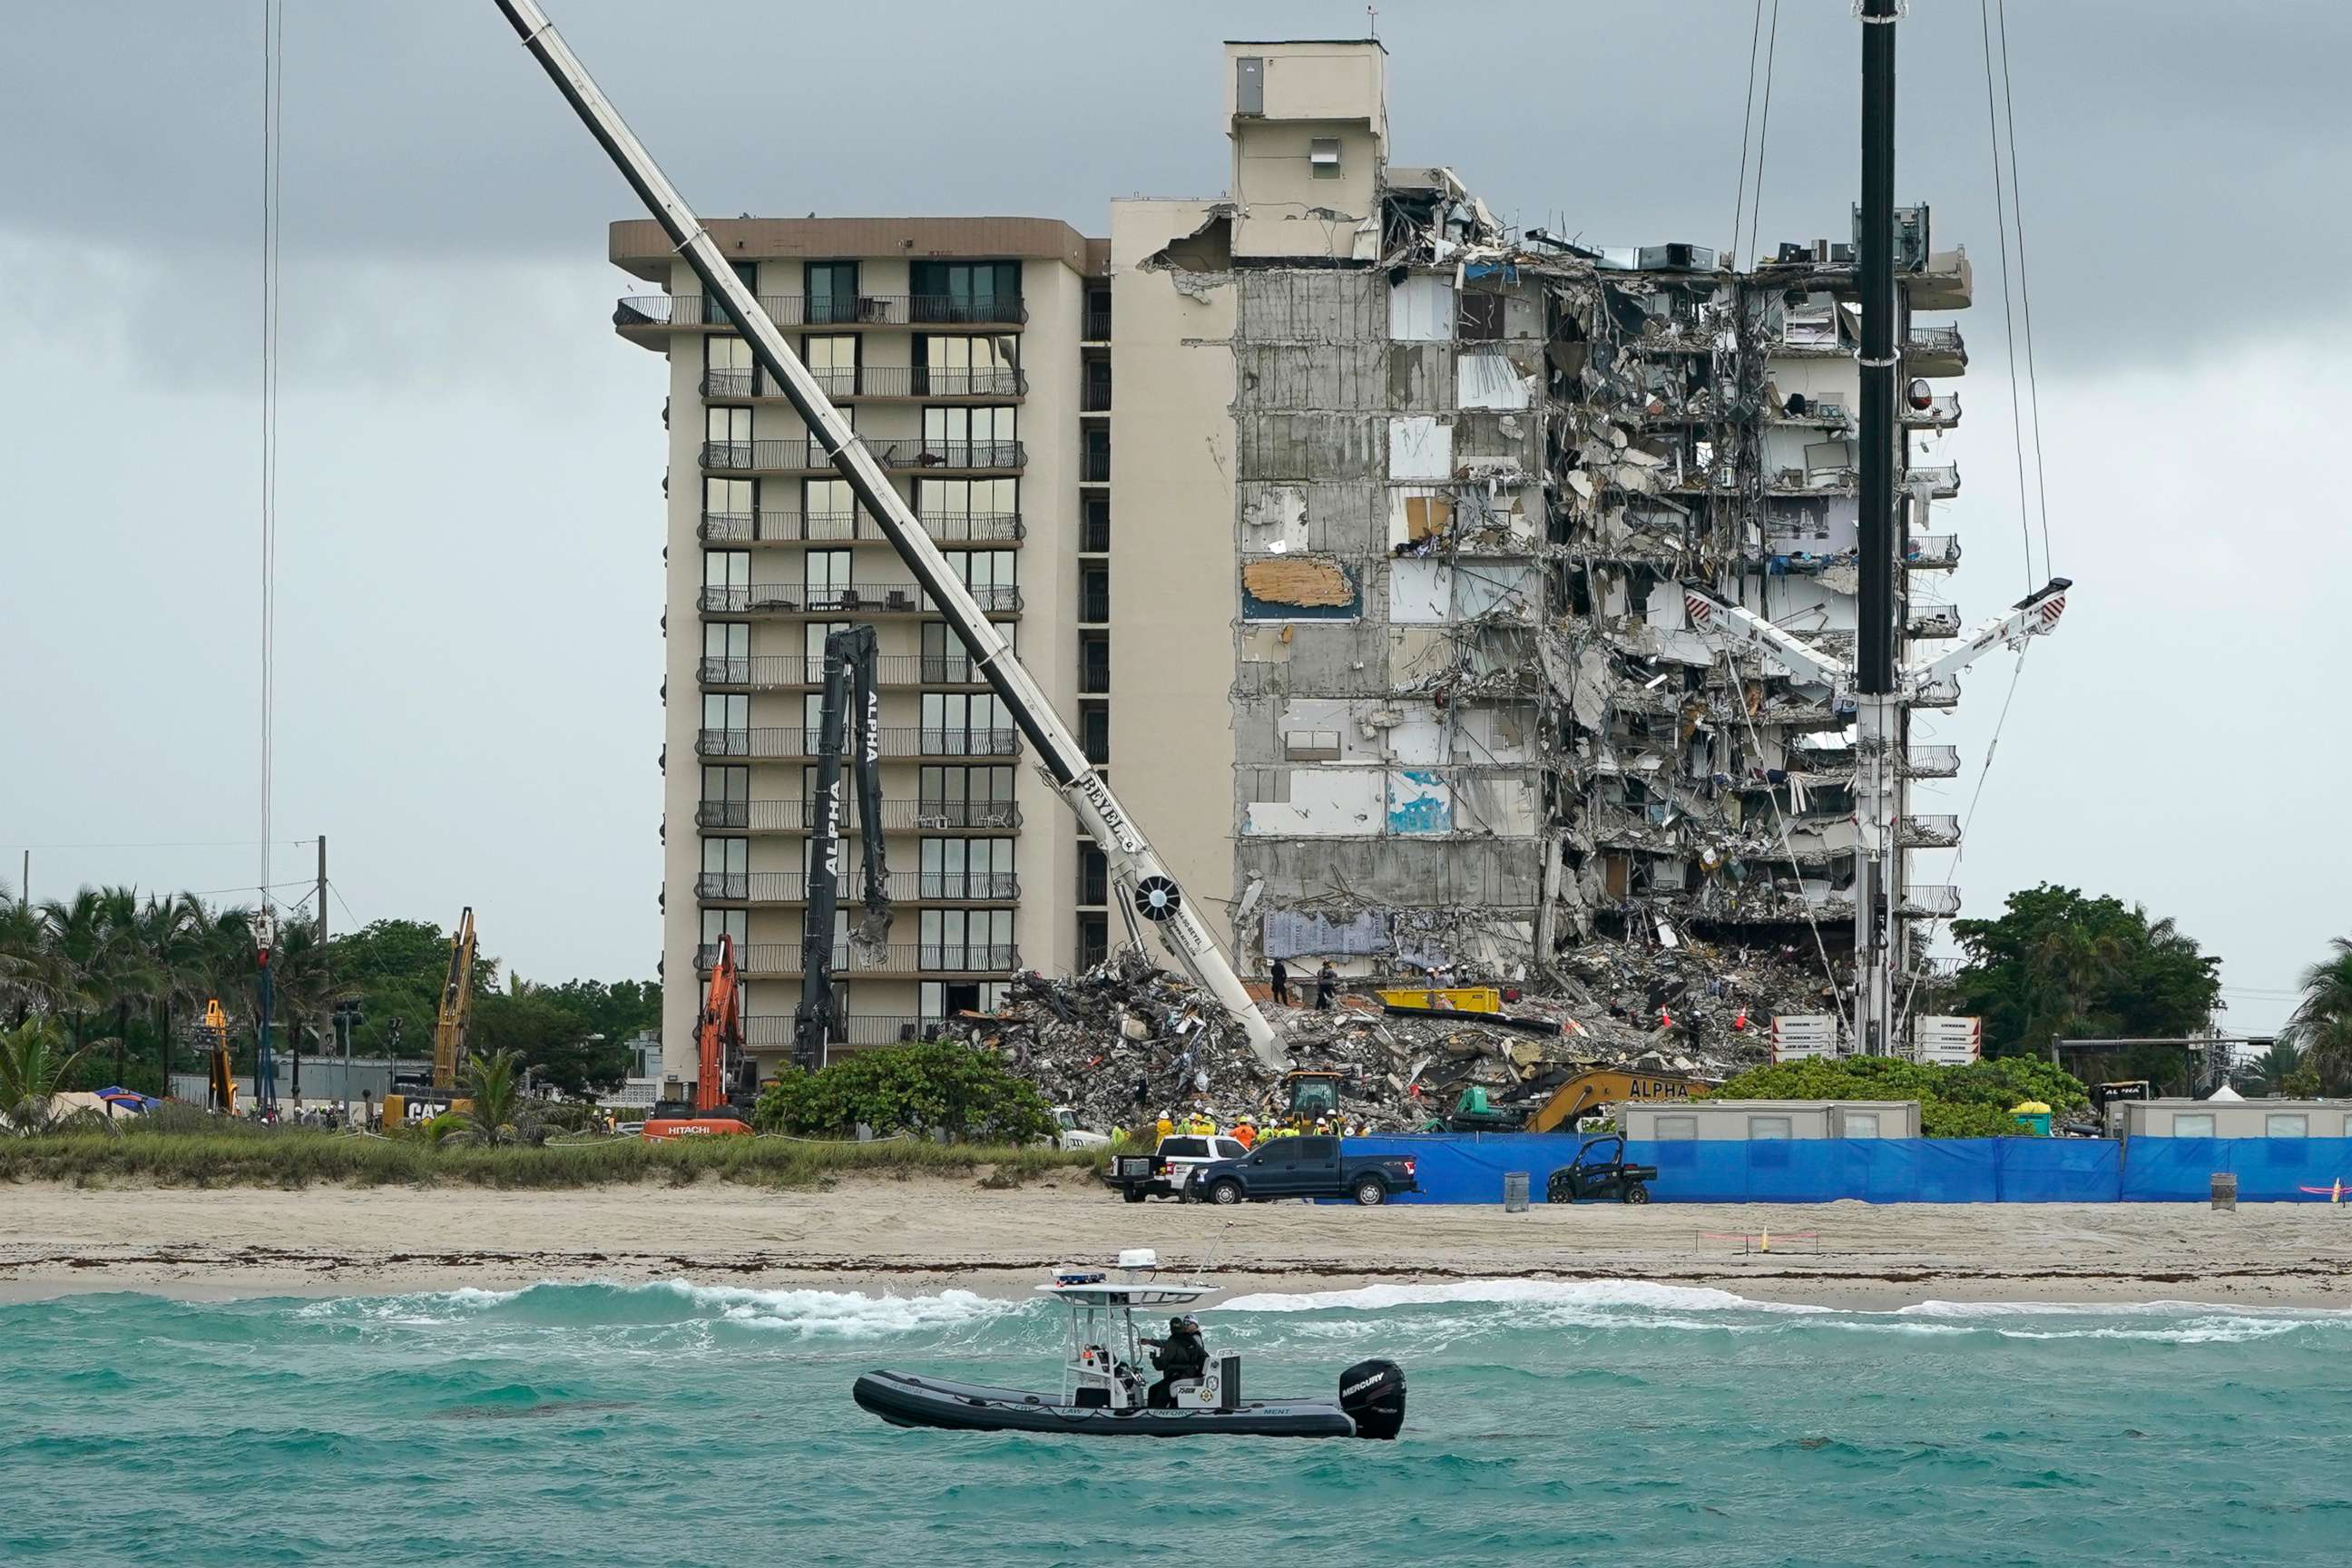 PHOTO: A Florida Fish and Wildlife Conservation law enforcement boat patrols the oceanfront as search and rescue efforts continue at the Champlain Towers South condo building, June 30, 2021, in Surfside, Fla., near Miami Beach.